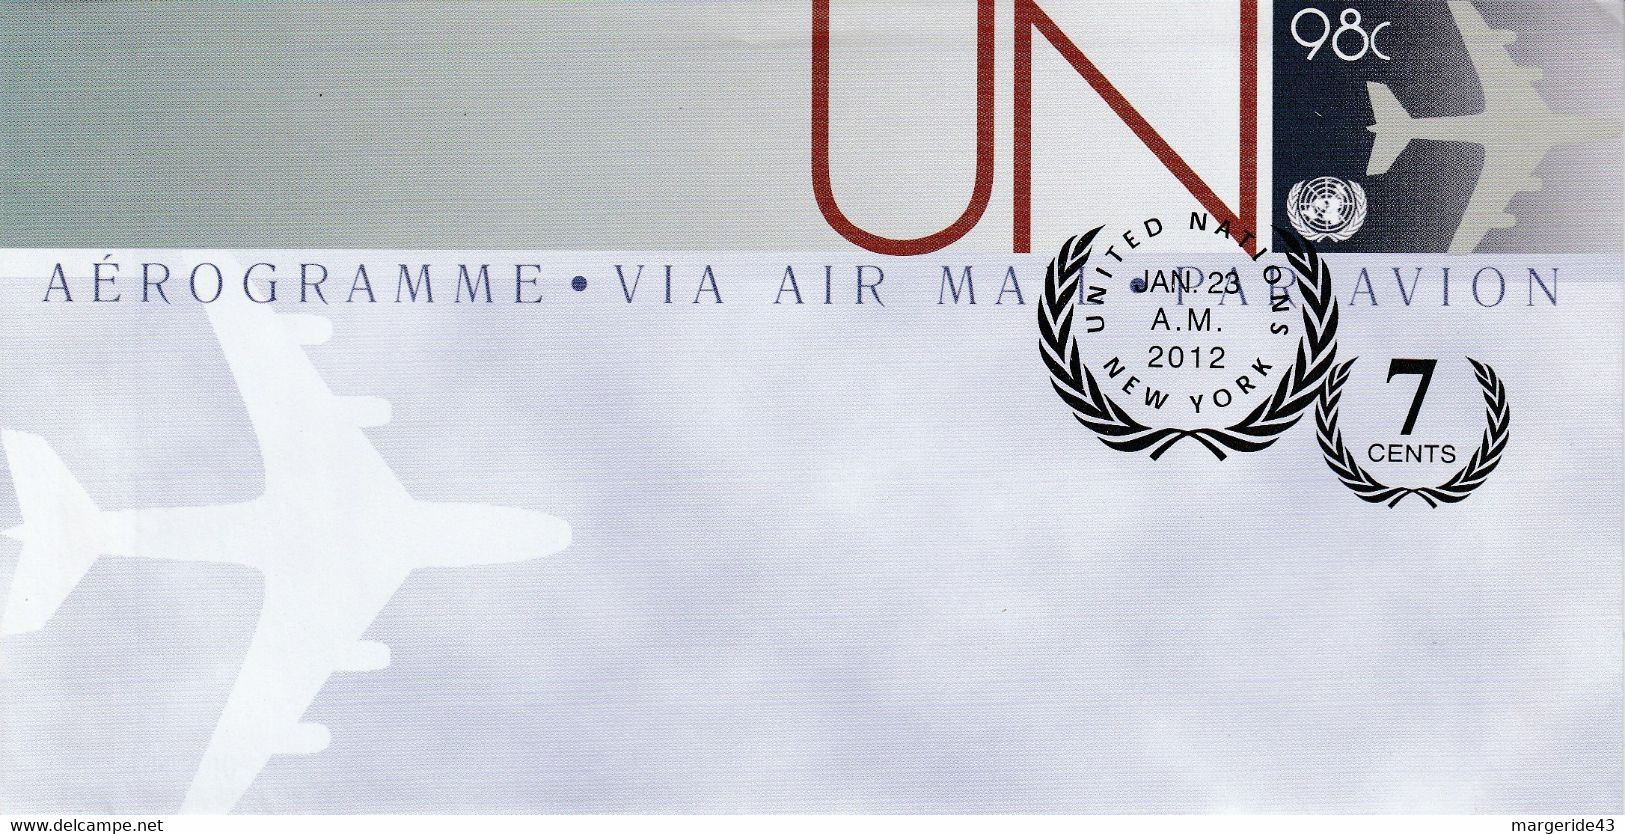 NATIONS UNIES 2012 AEROGRAMME FDC 98 CENTS - Storia Postale